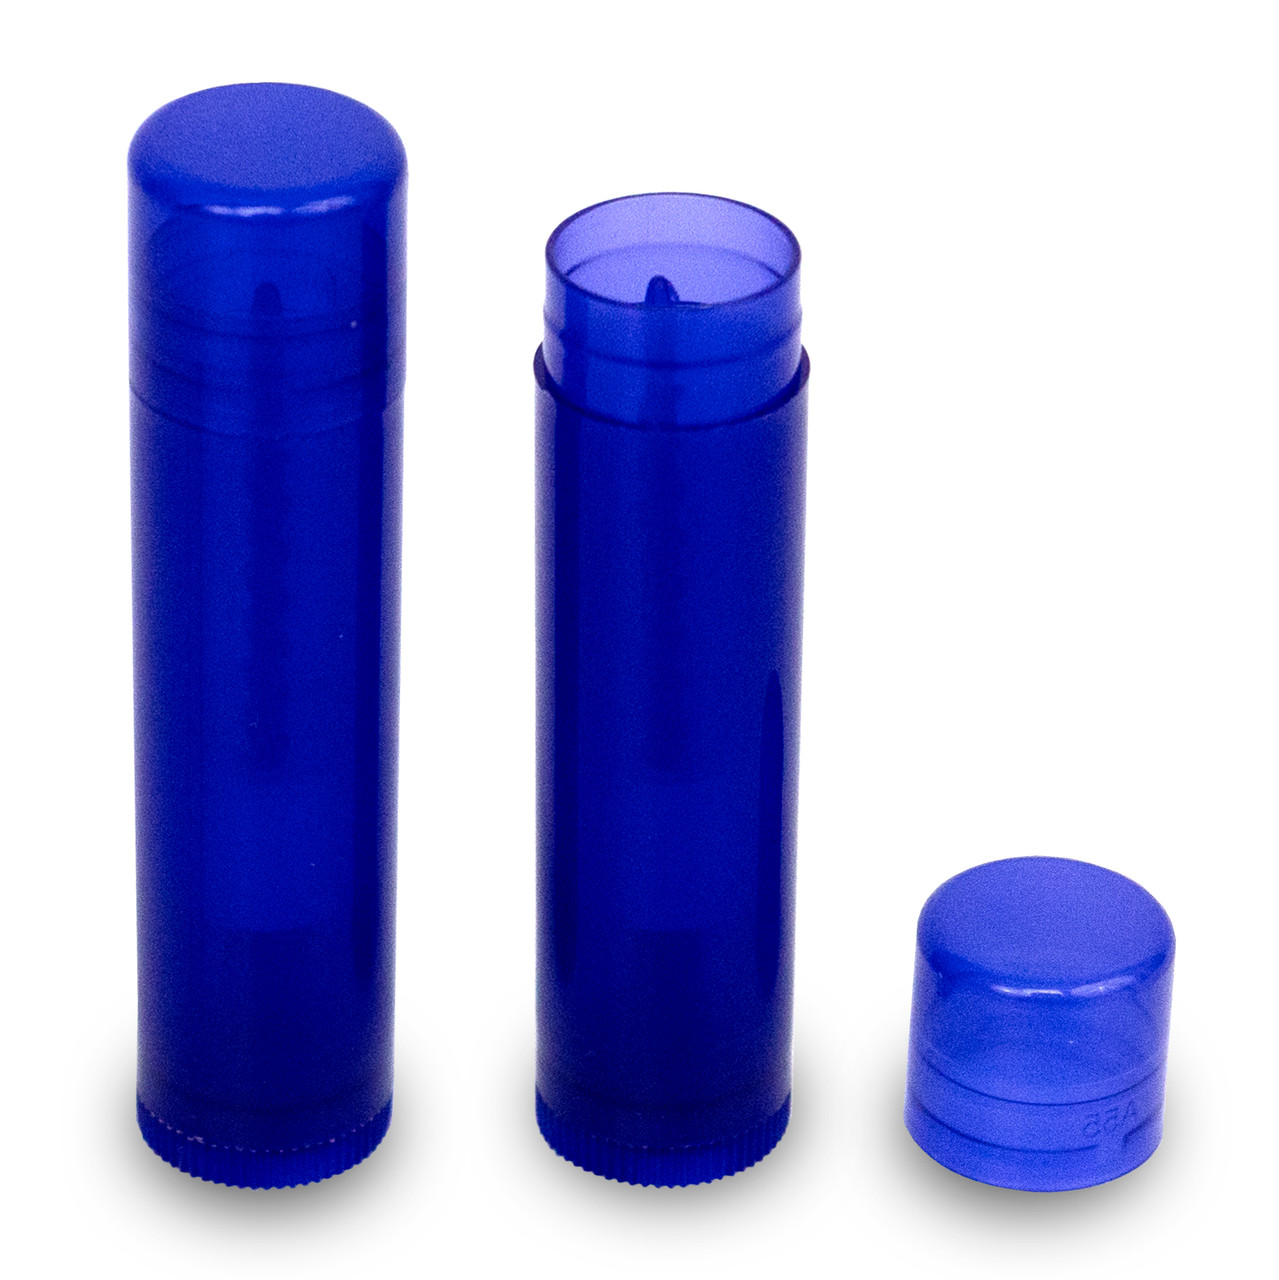 Best Lip Balm Containers